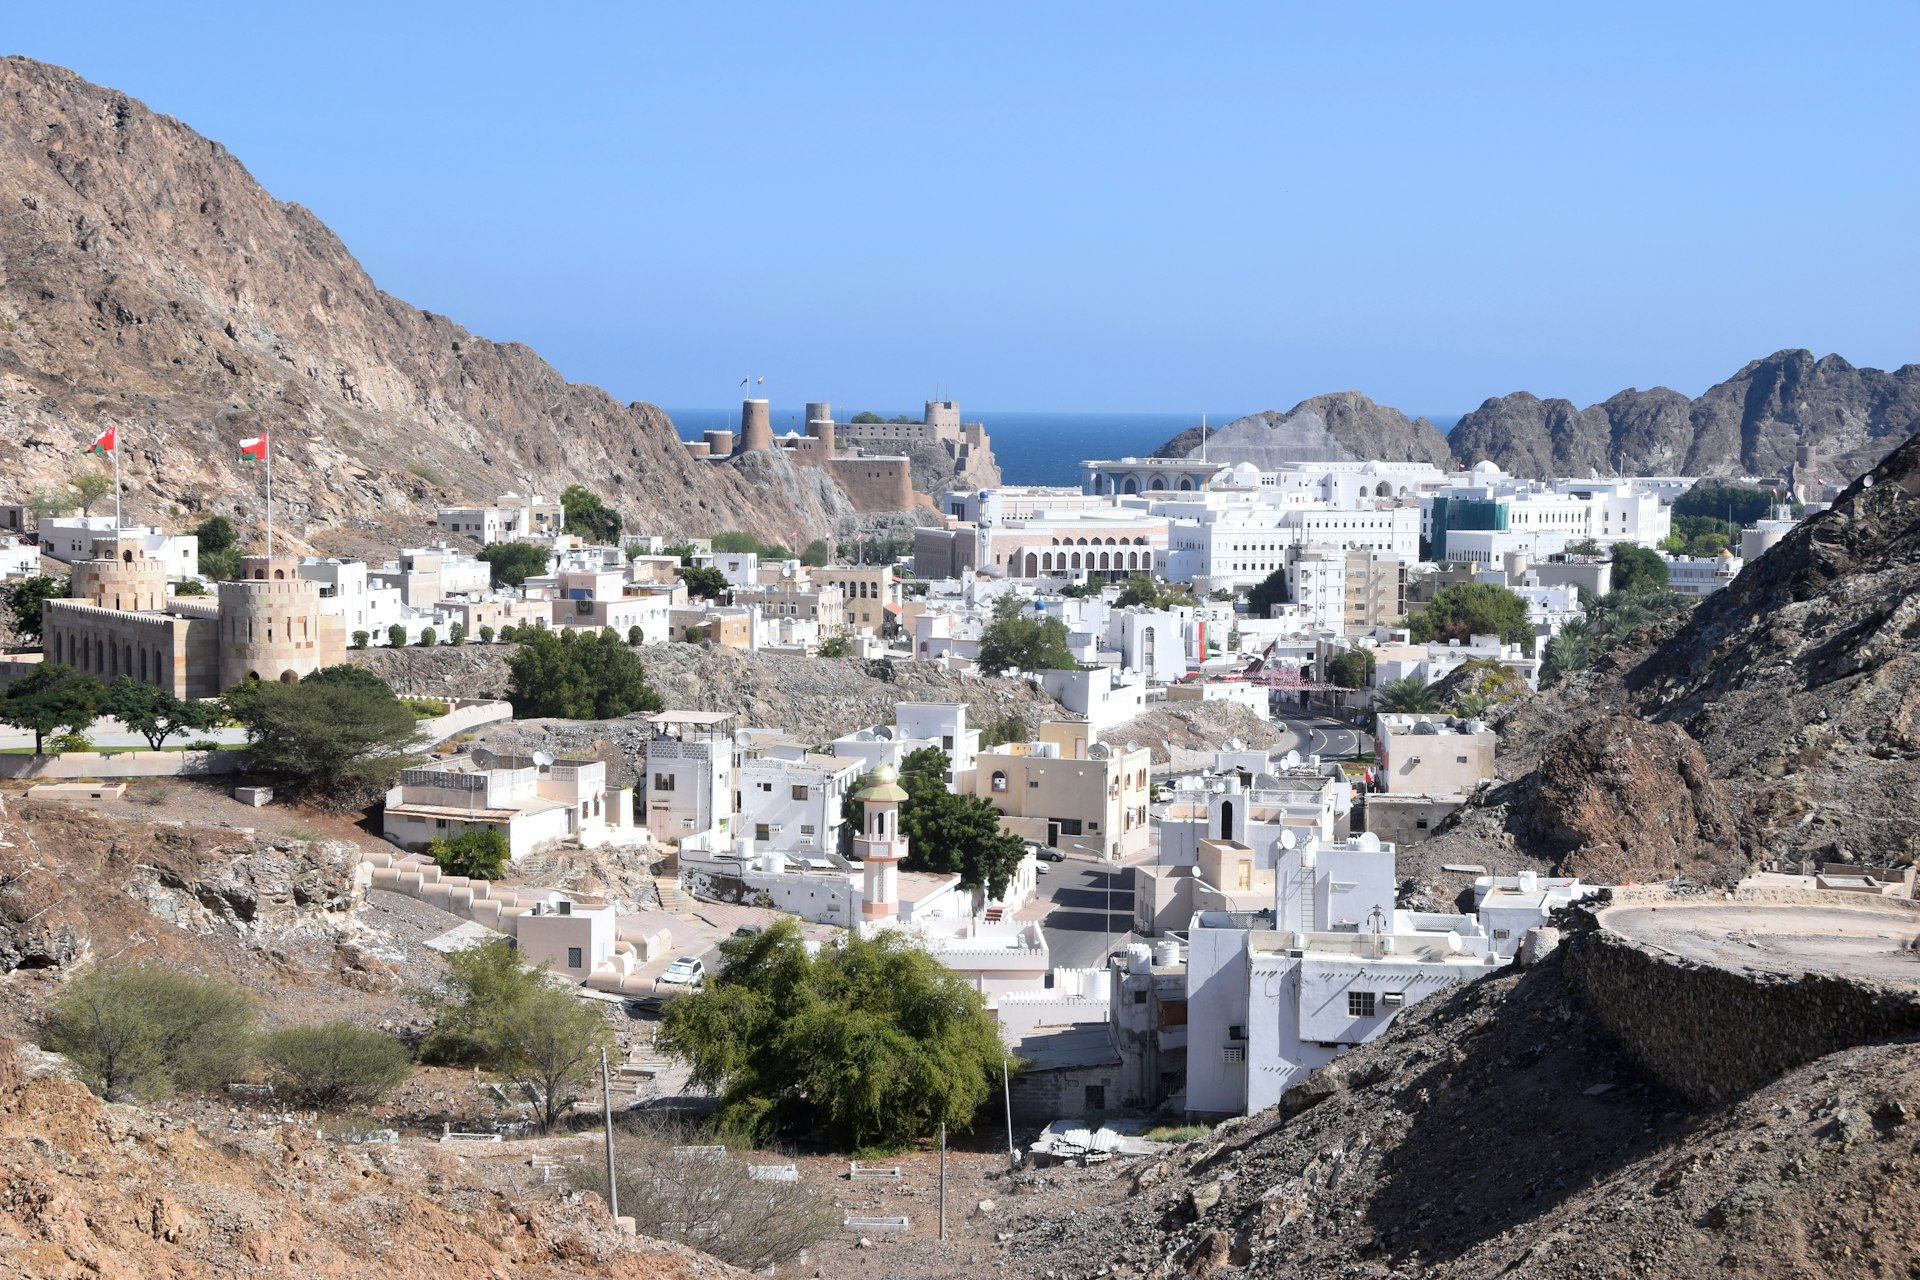 View of the white buildings of the old town of Muscat, Oman, among brown mountains and the blue Gulf of Oman in the distance